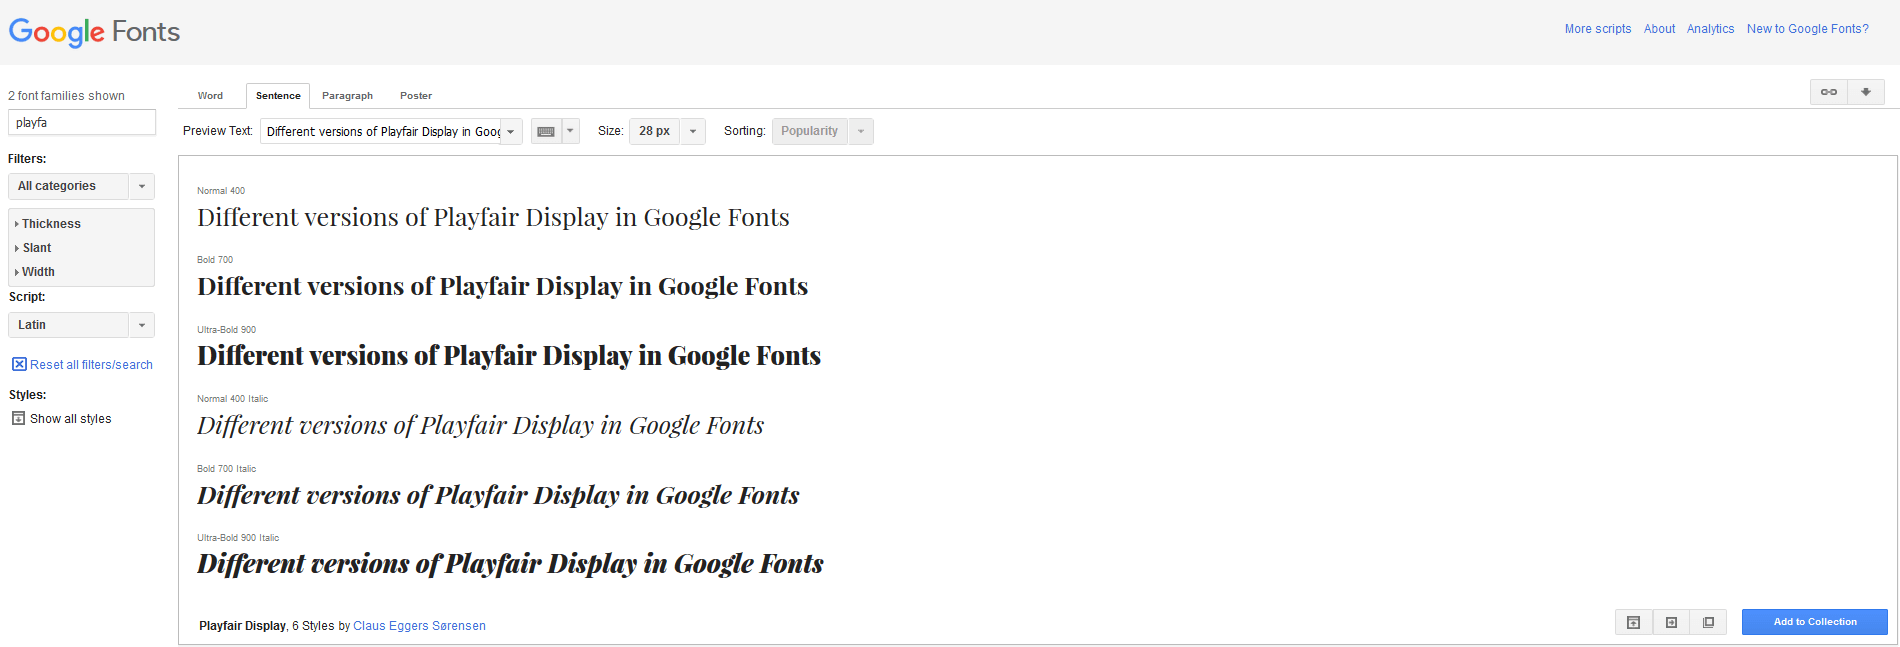 Different versions of Playfair Display in Google Fonts